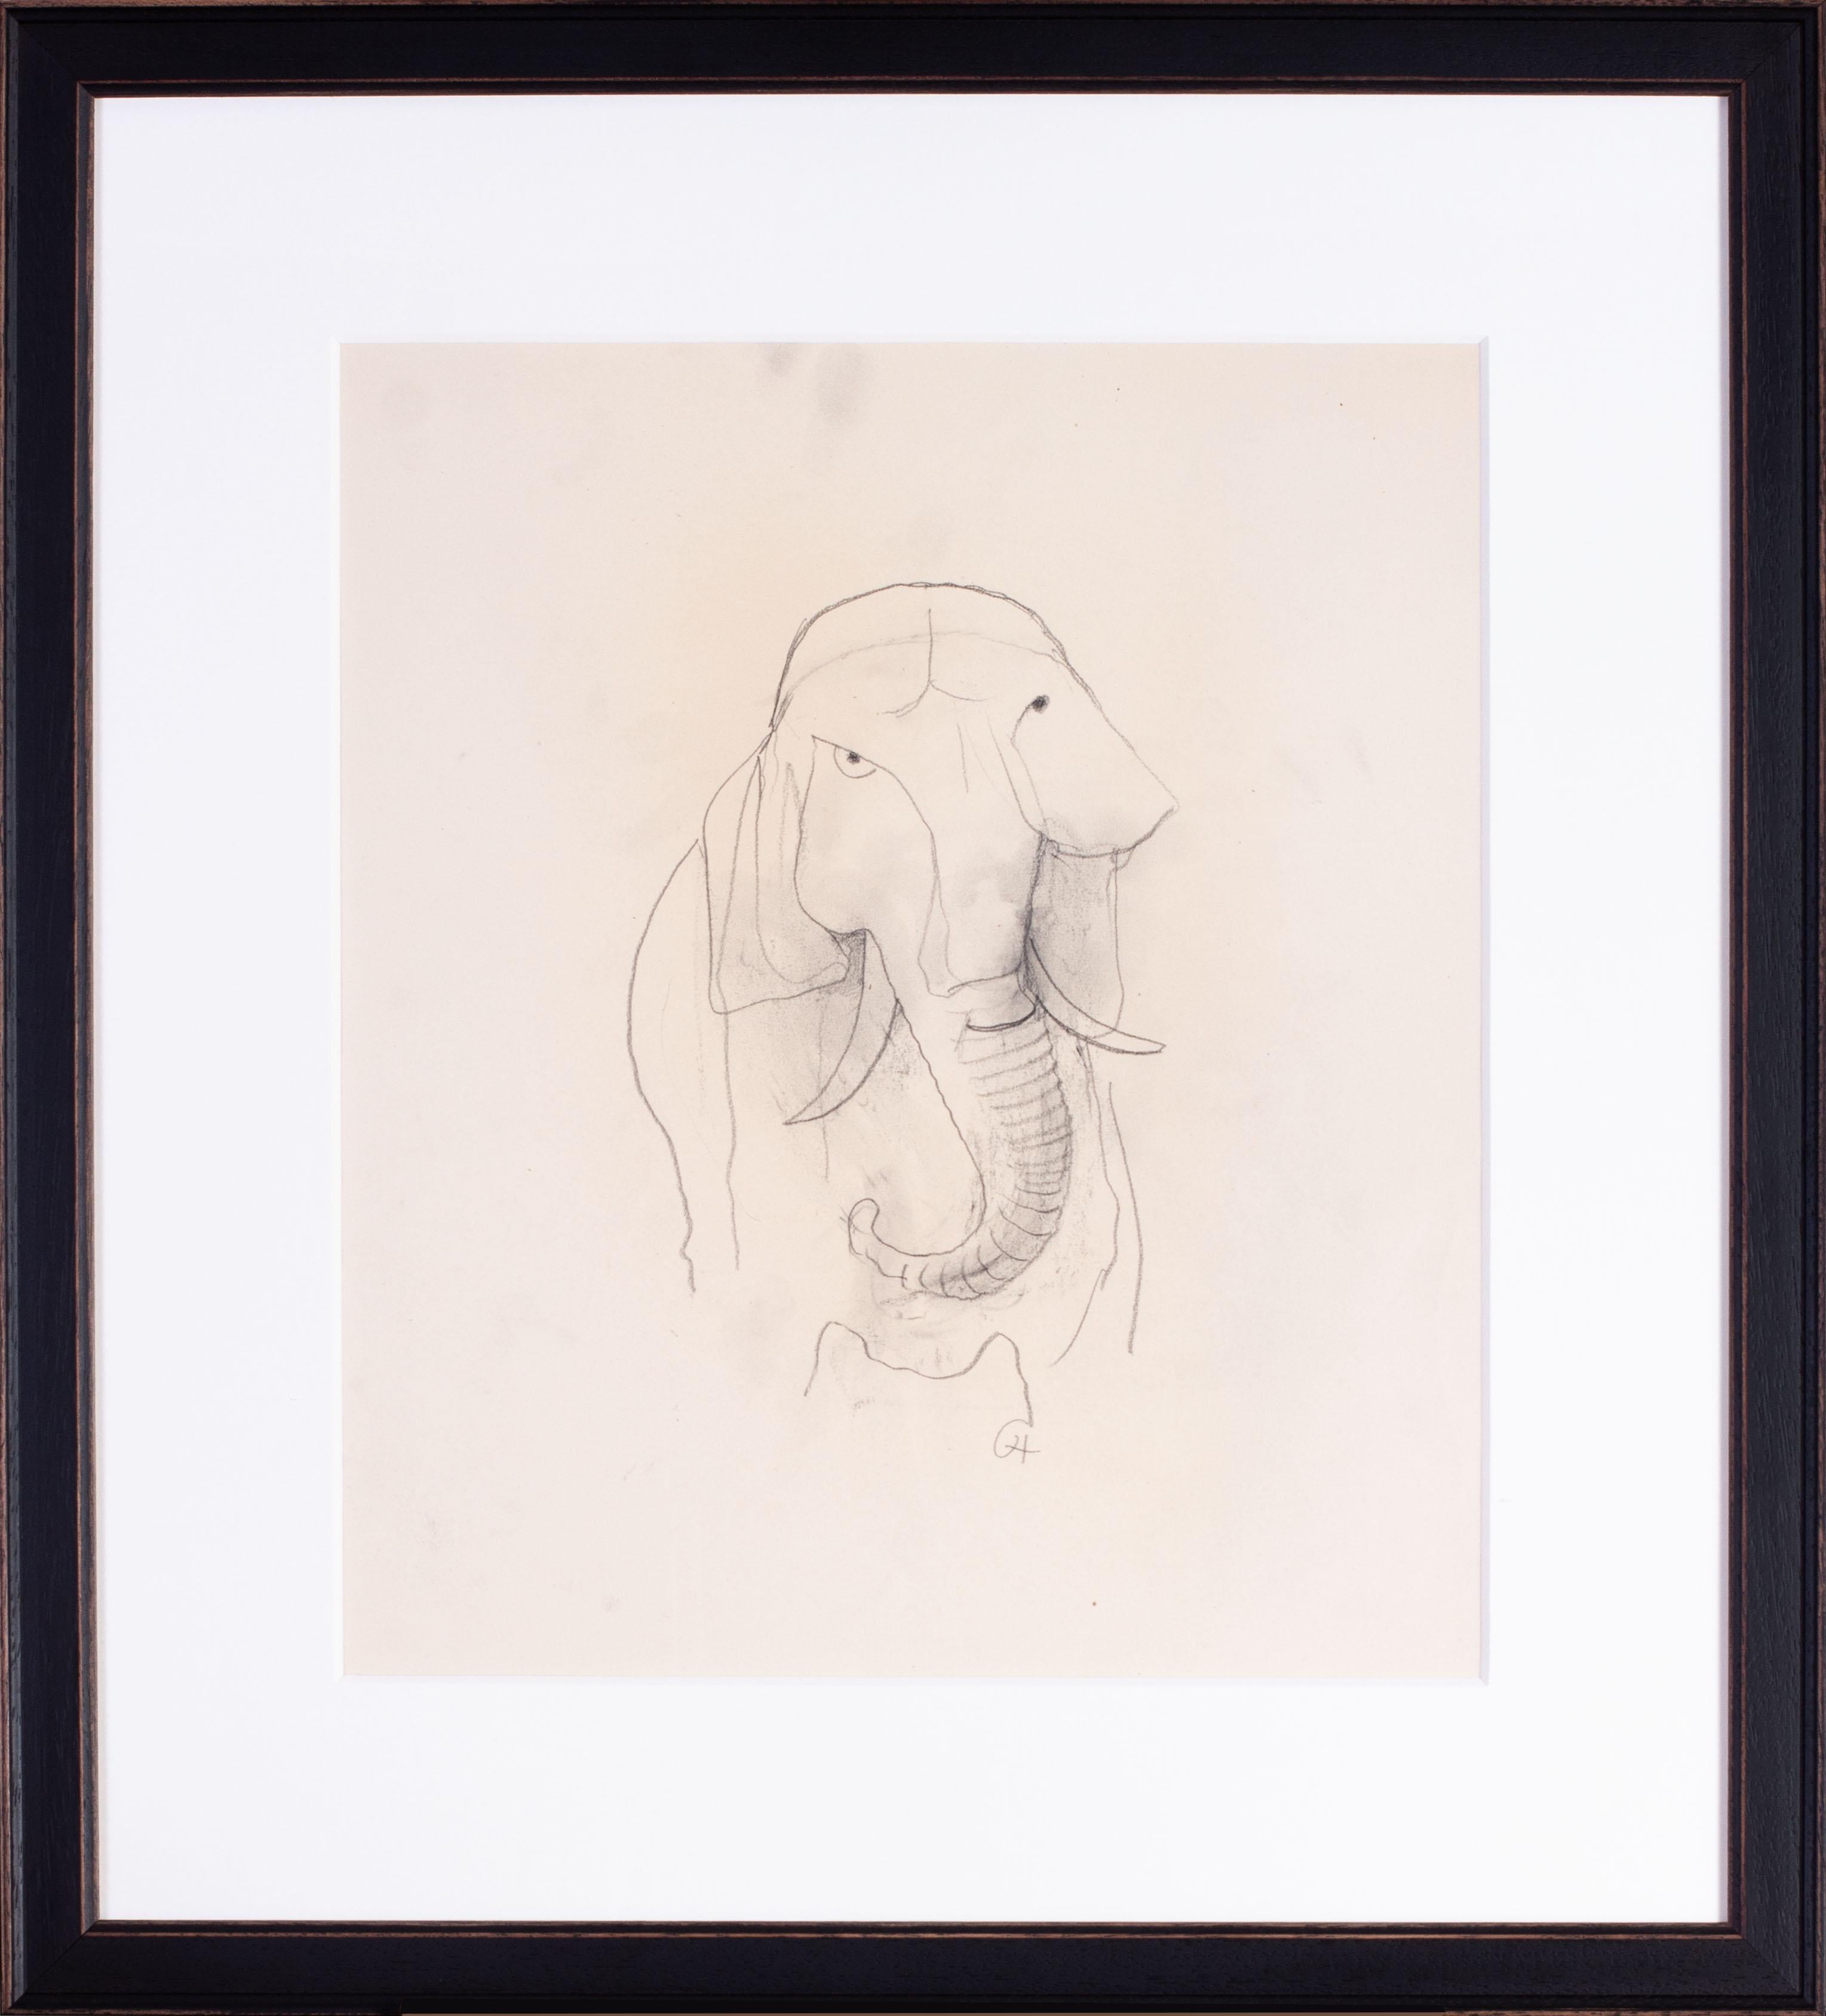 German expressionist drawing of a Bull Elephant by Carl Hofer